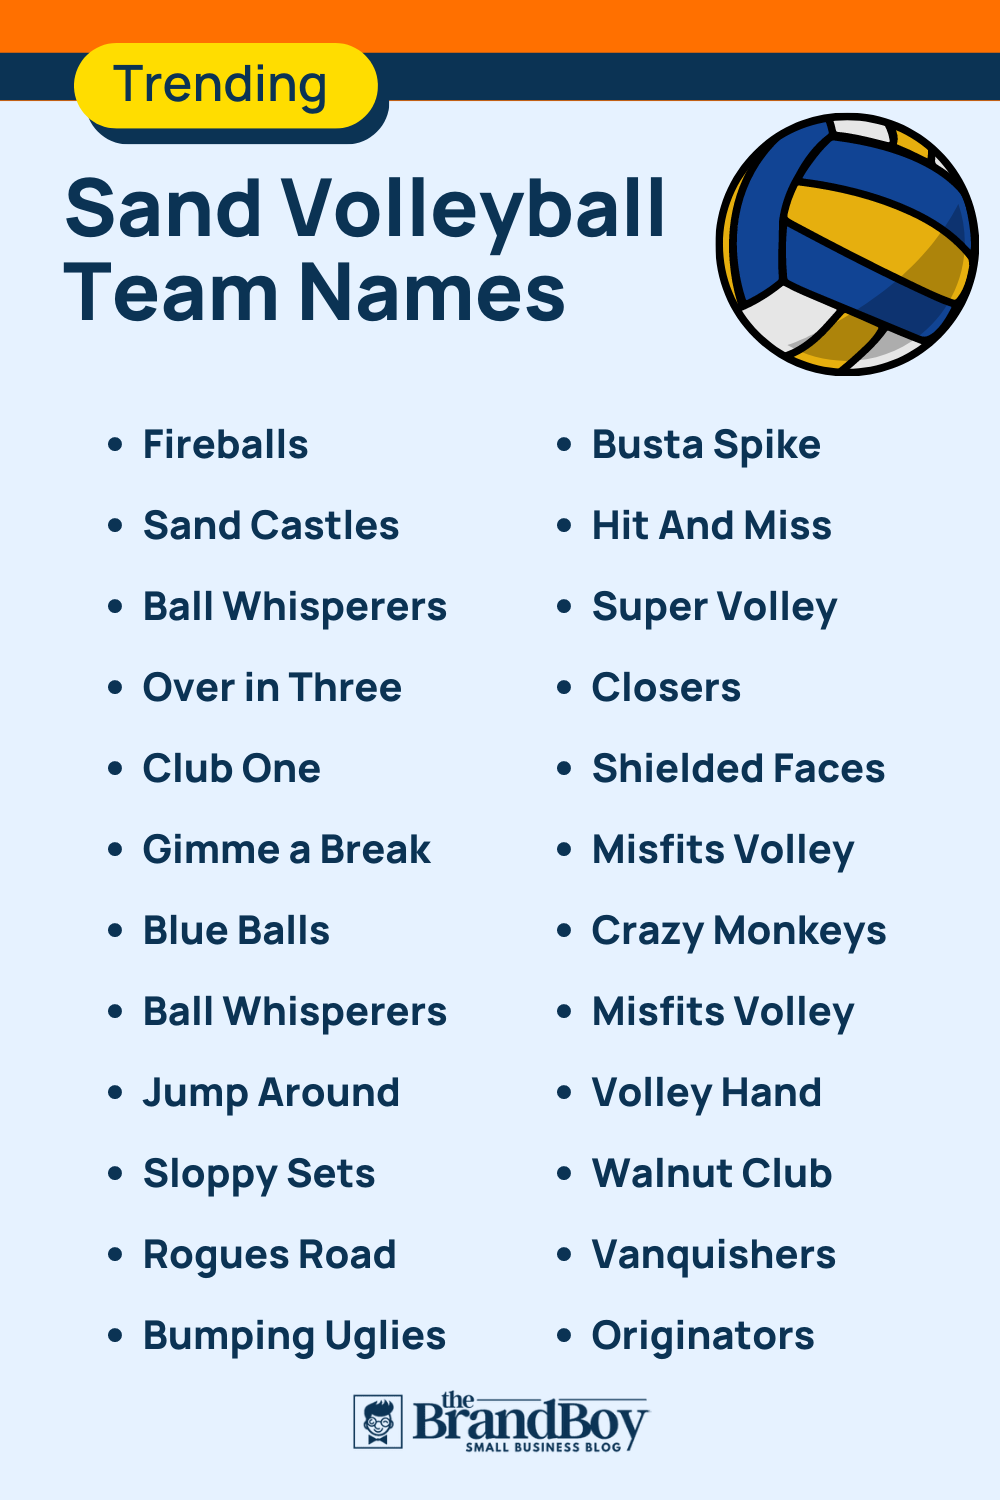 Trending Sand Volleyball Team Names 